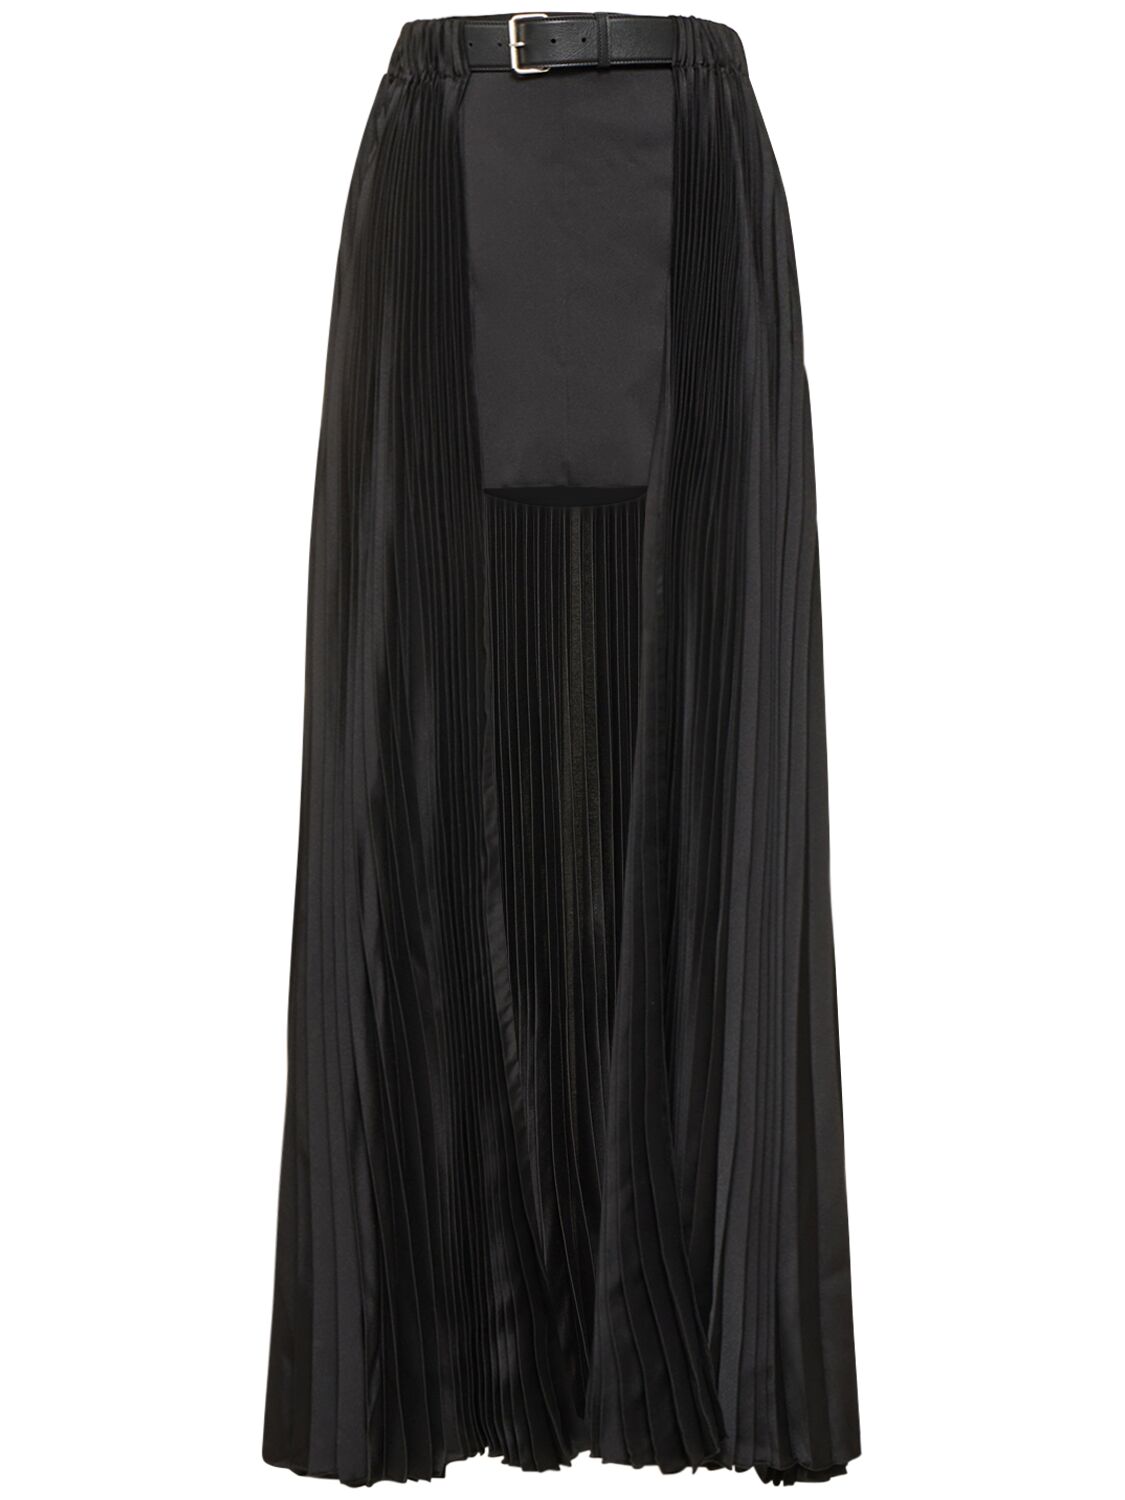 Image of Pleated Tech Open Skirt W/ Leather Belt